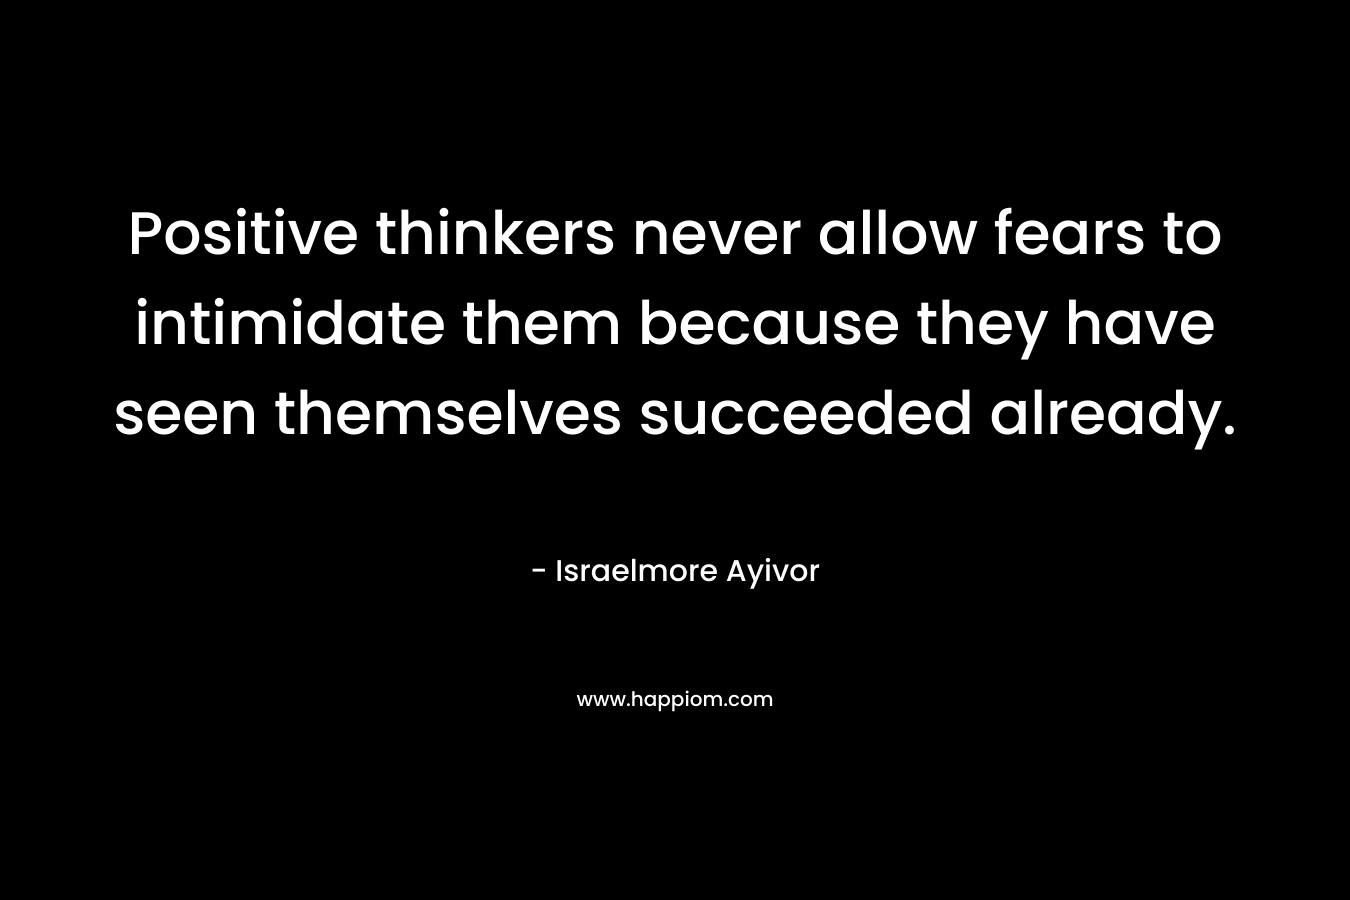 Positive thinkers never allow fears to intimidate them because they have seen themselves succeeded already.